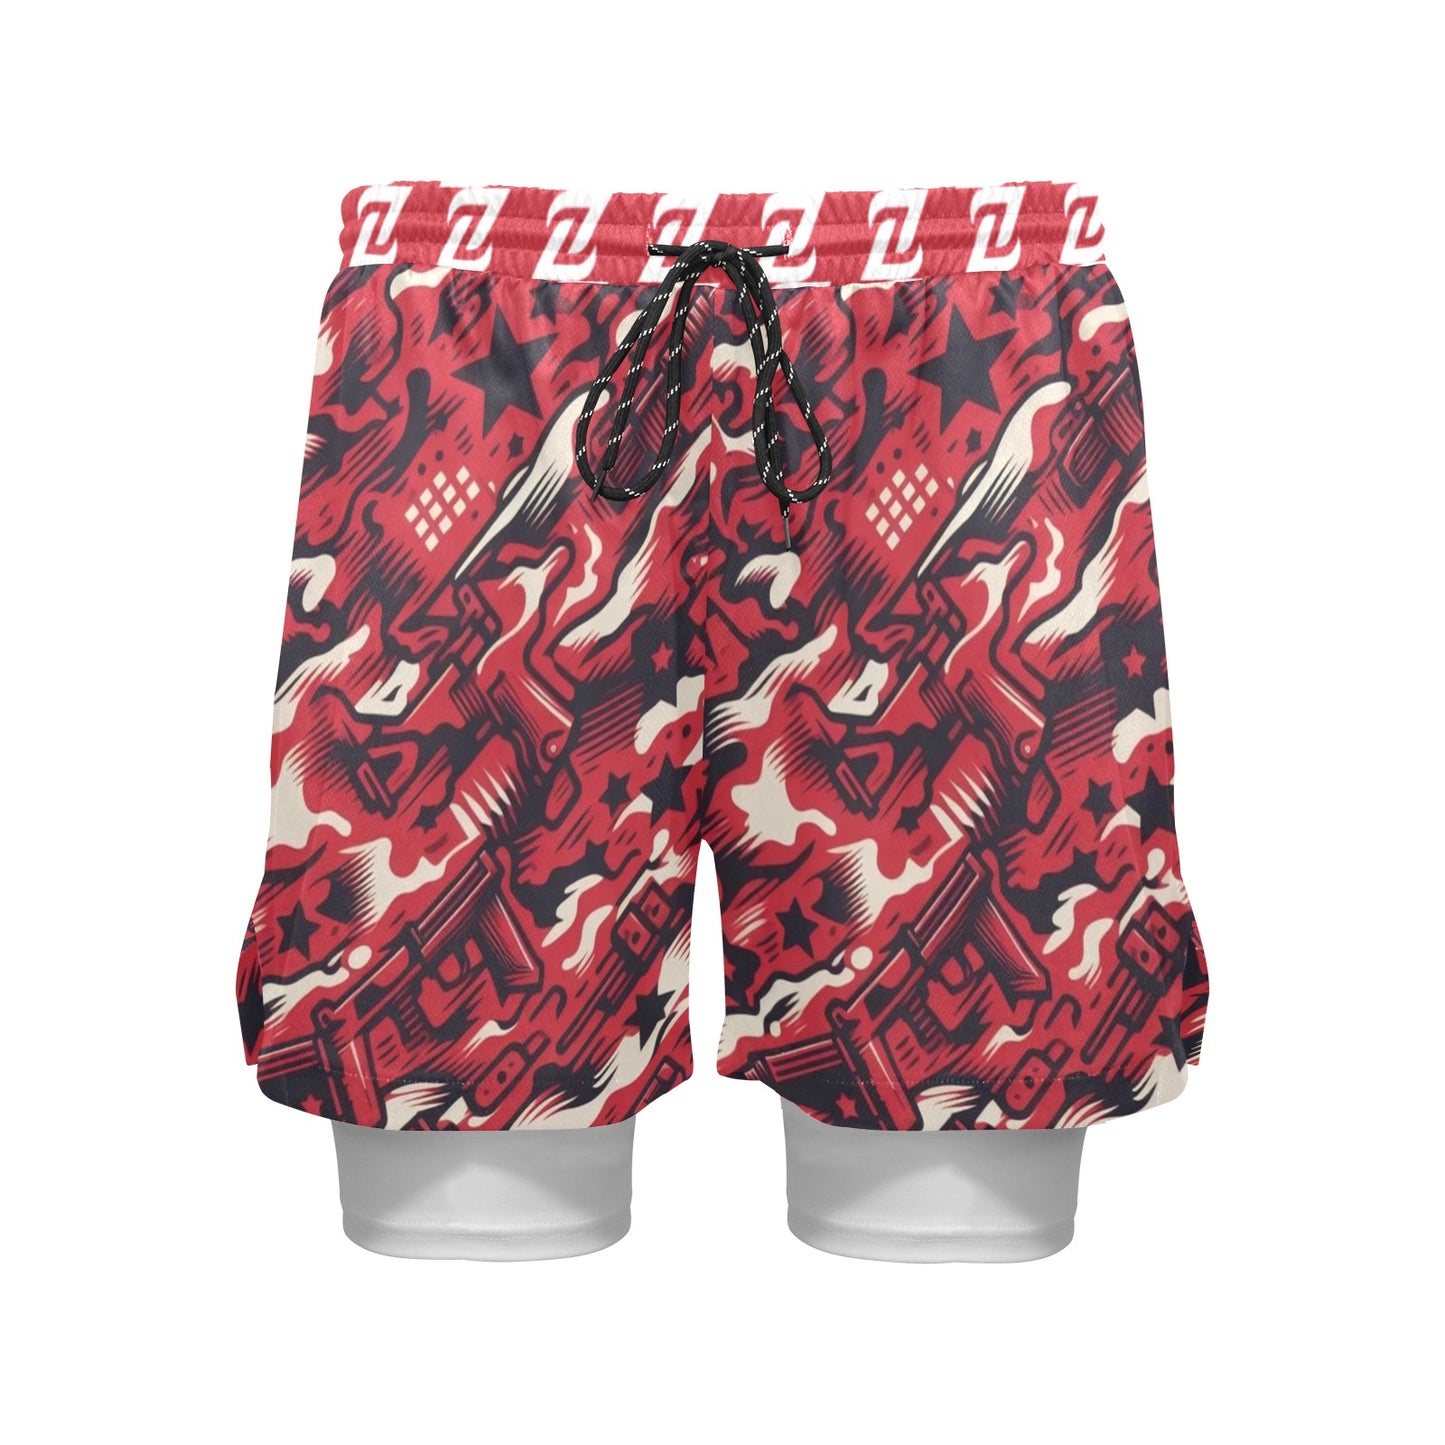 Zen Shorts with Liner - Red Camo